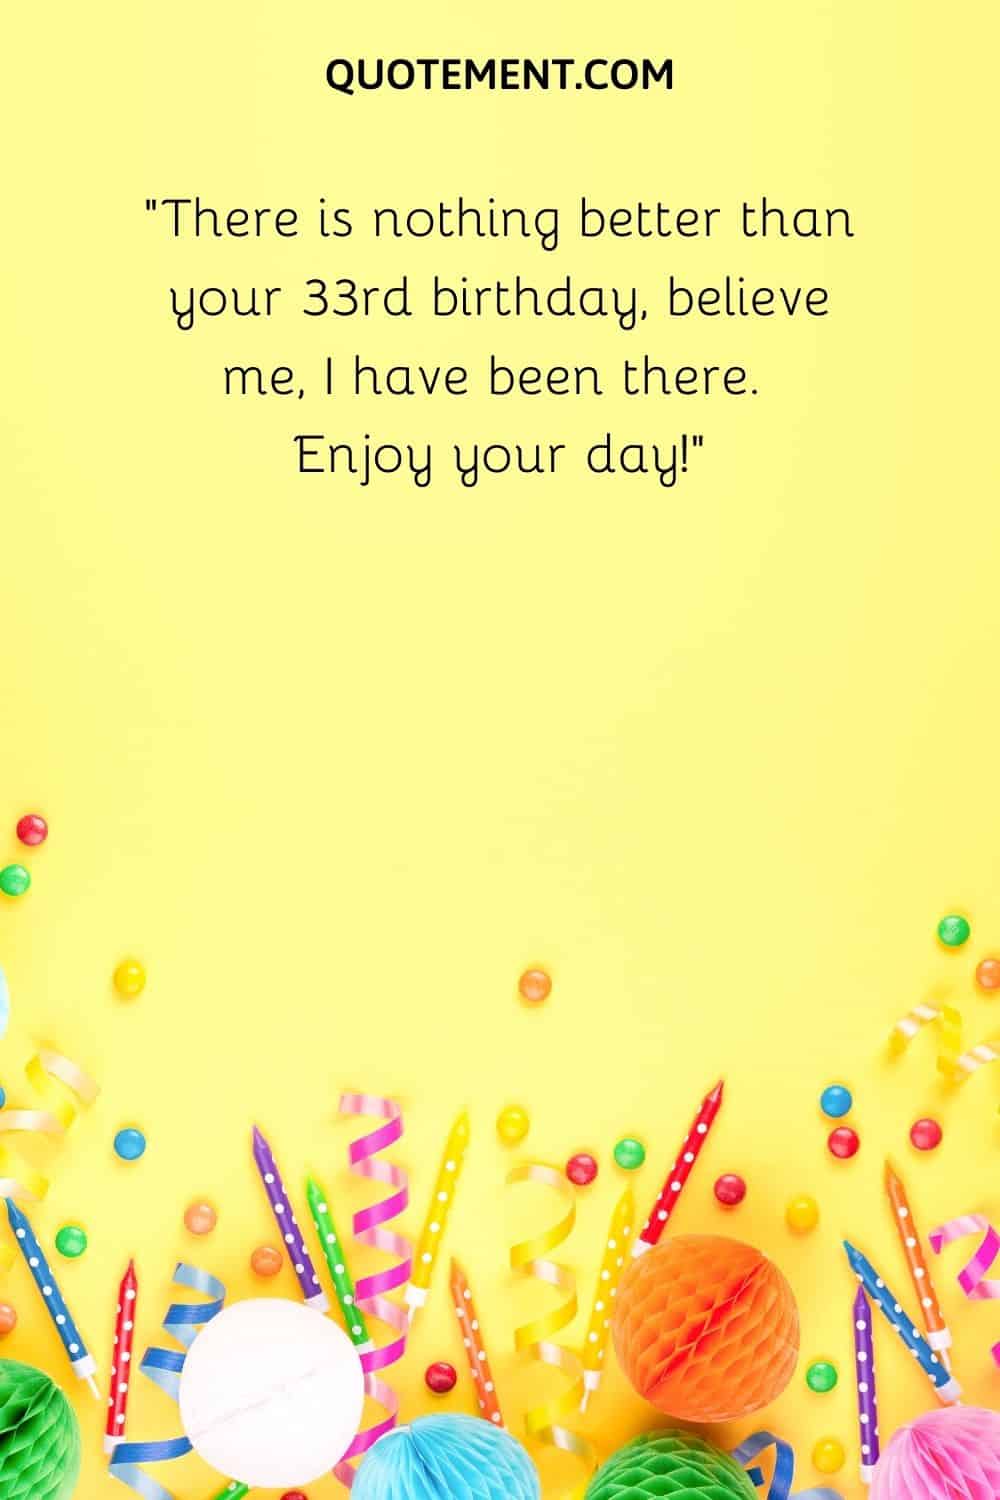 There is nothing better than your 33rd birthday, believe me, I have been there.